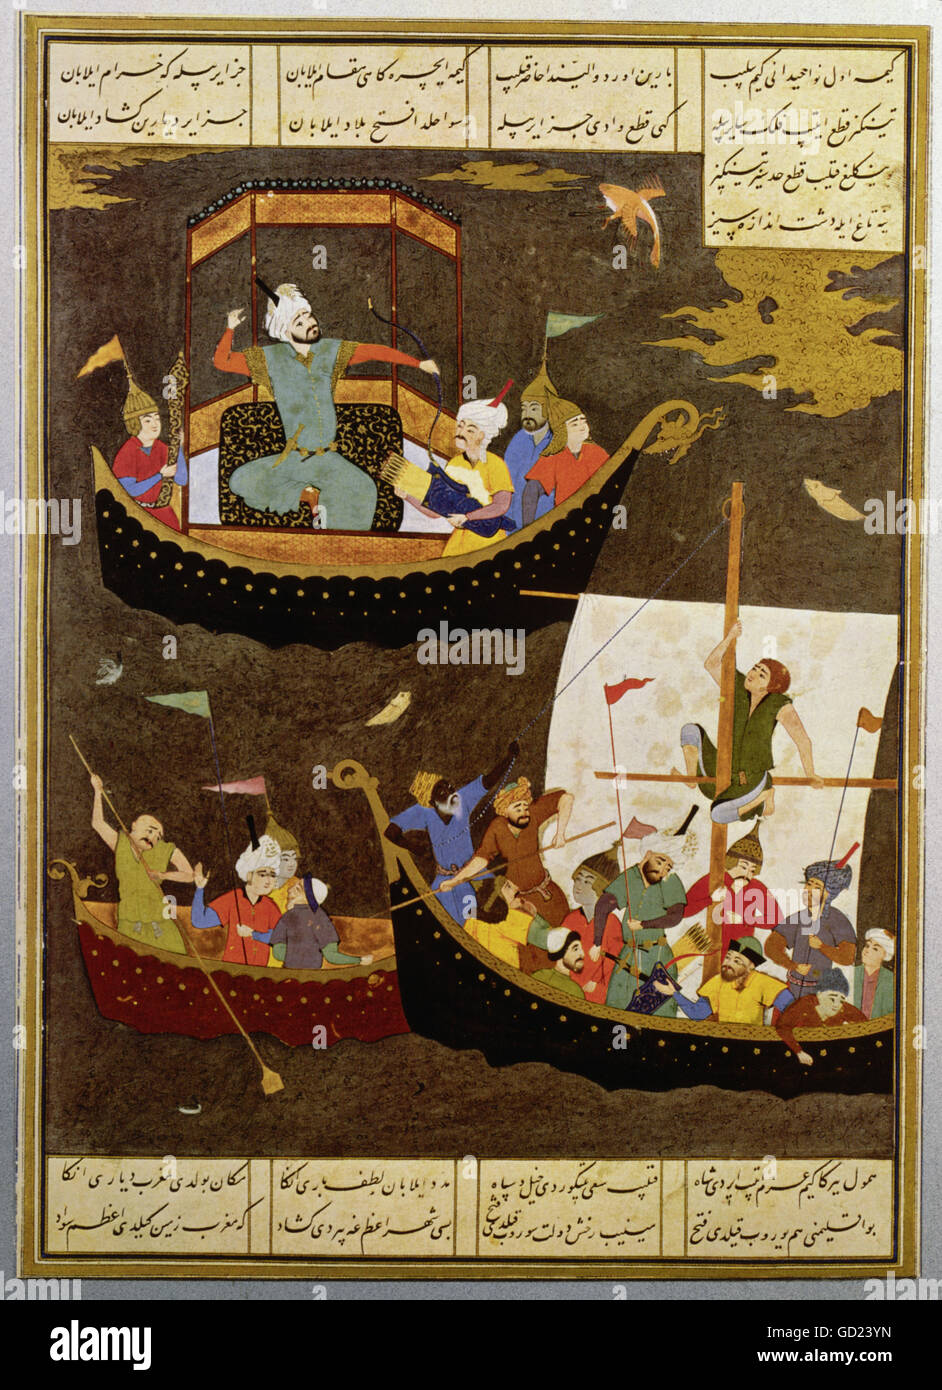 literature, Alexander romance, Alexander shooting a flying duck from a boat, Persian miniature by Mir Ali Schir Nawai, Tabriz, 1526, Additional-Rights-Clearences-Not Available Stock Photo